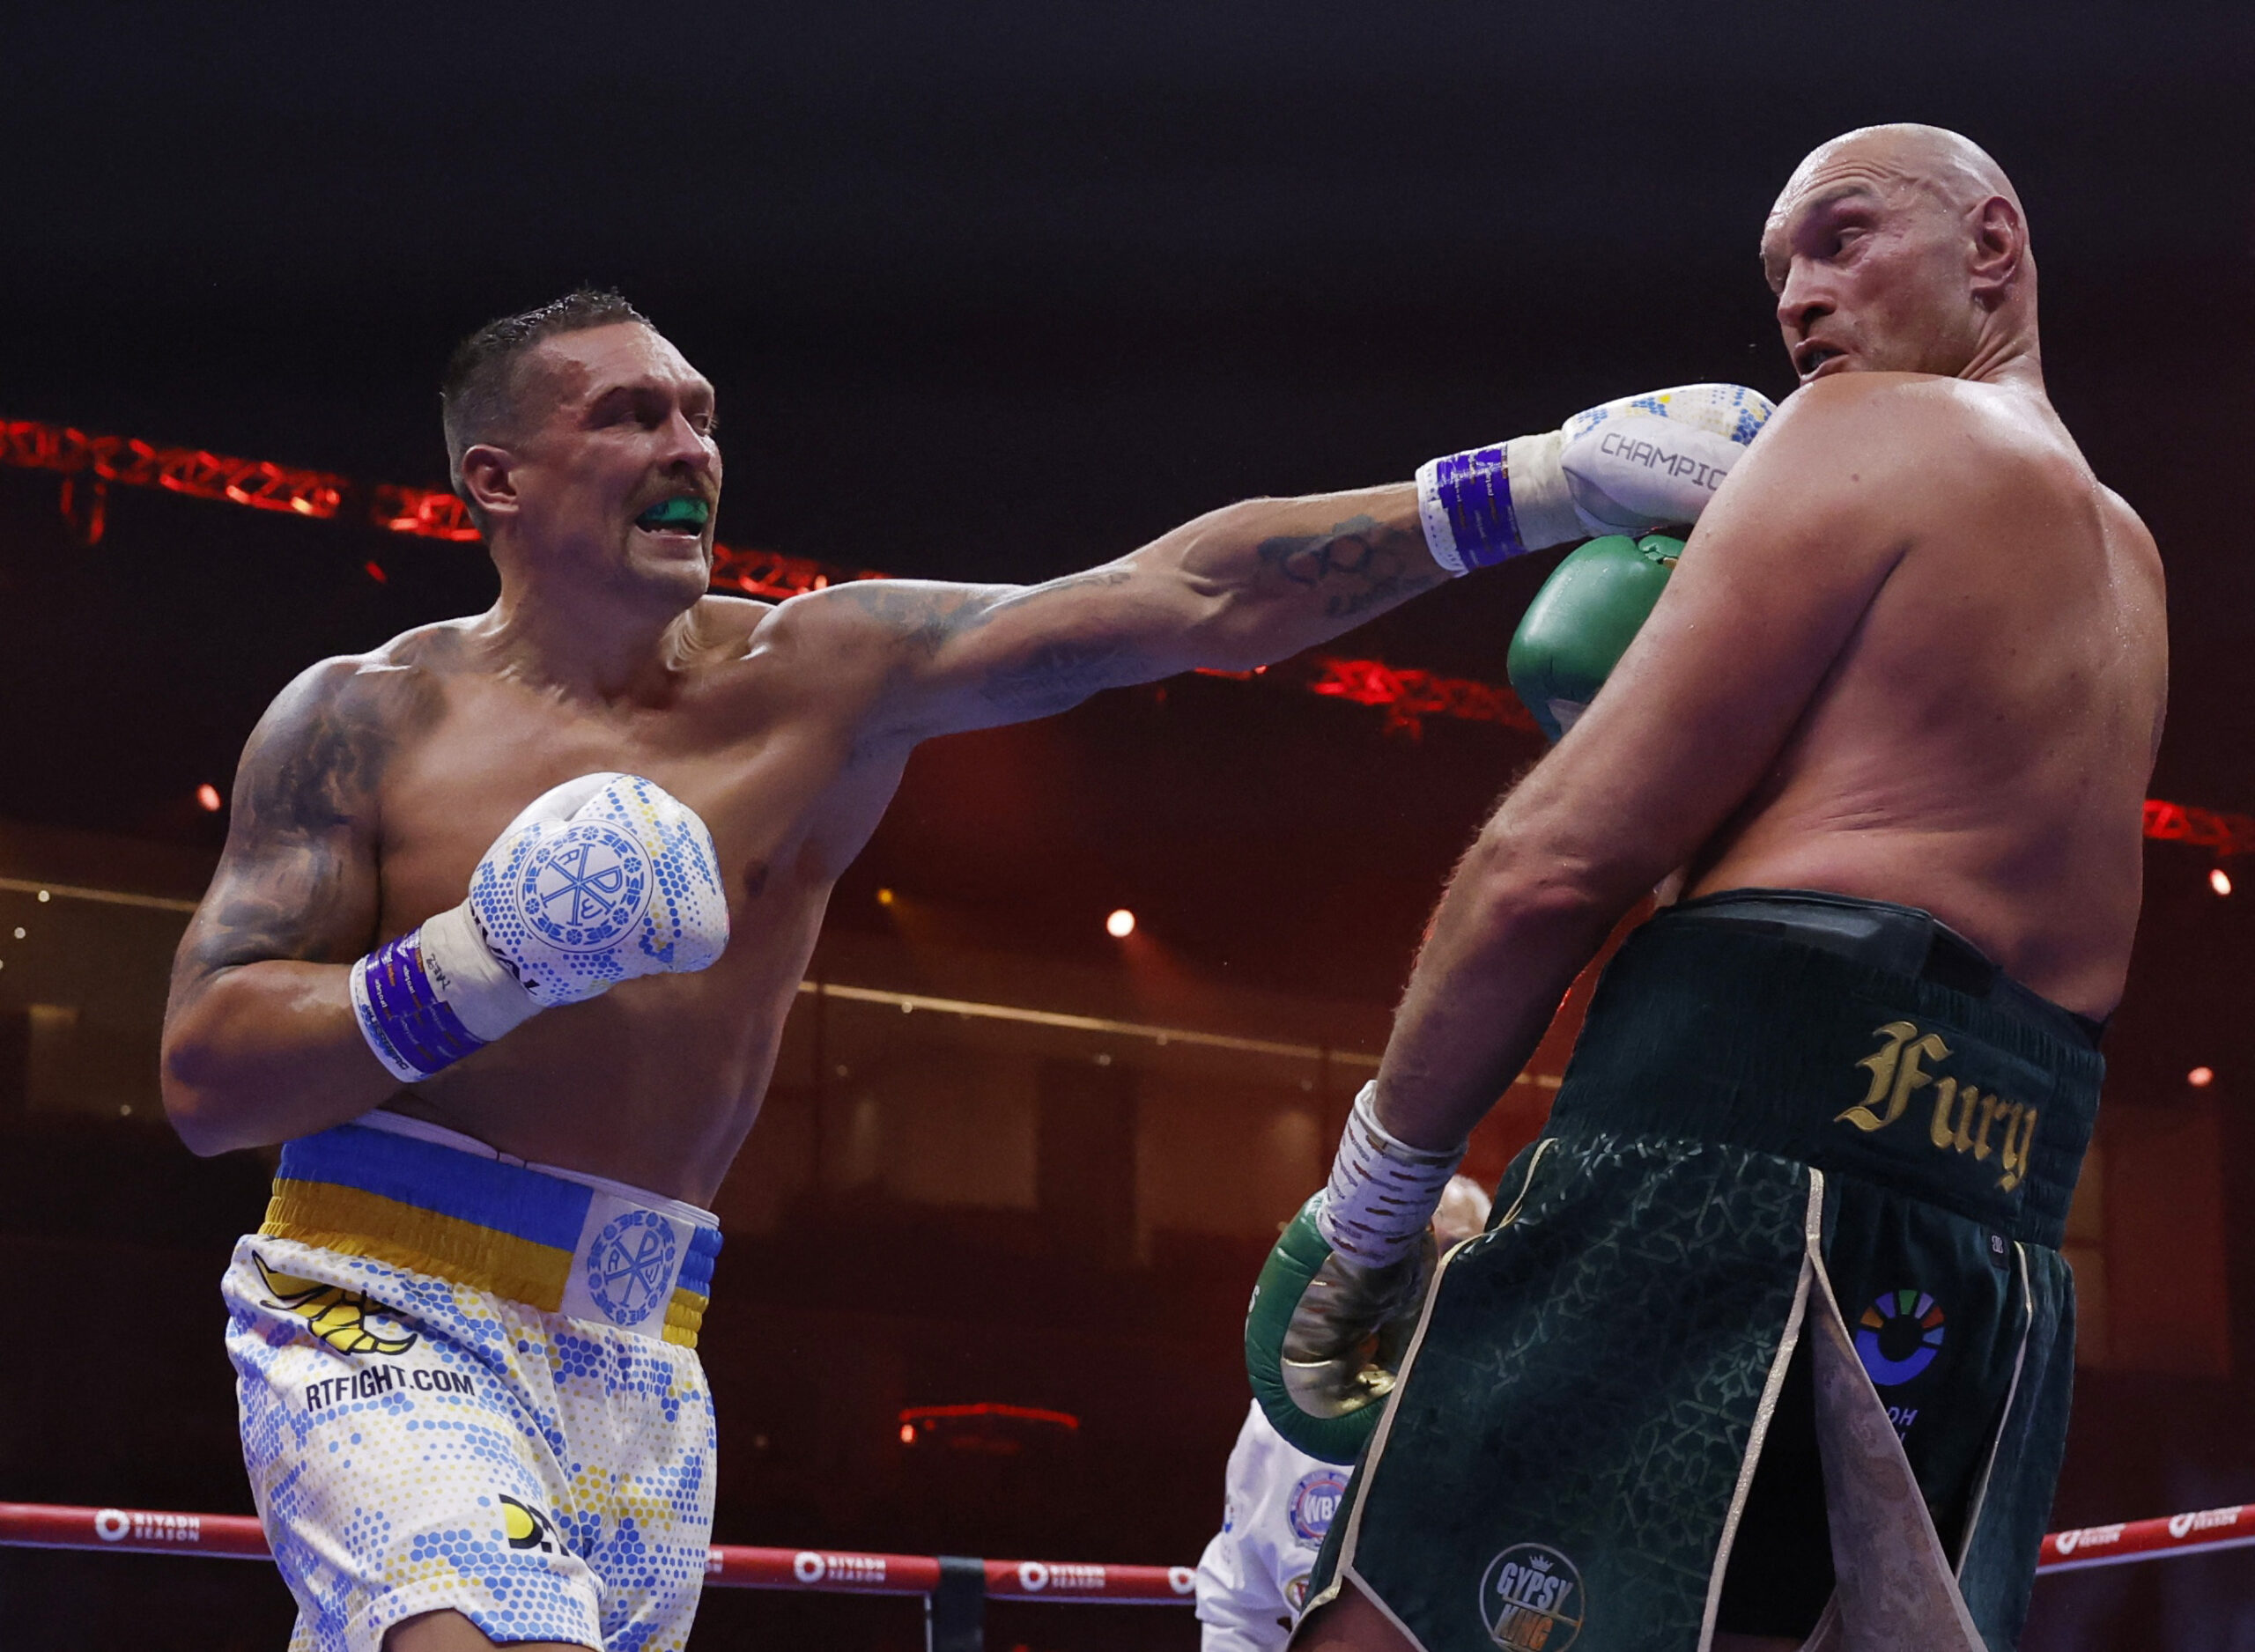 Usyk defeated Fury to become the undisputed heavyweight champion